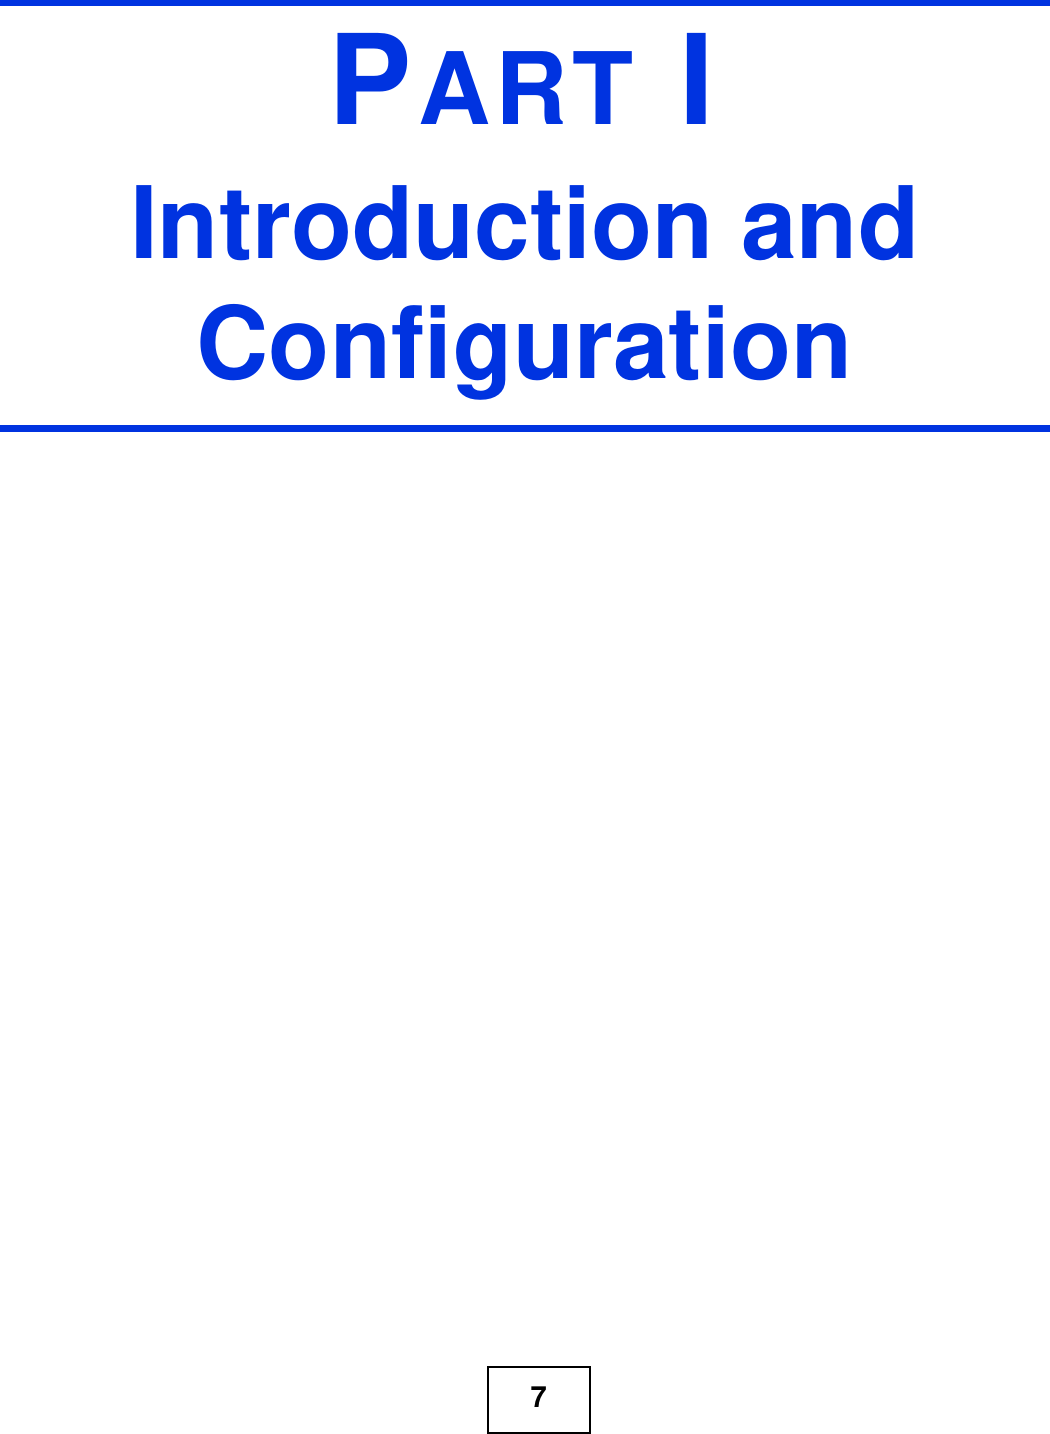 7PART IIntroduction and Configuration